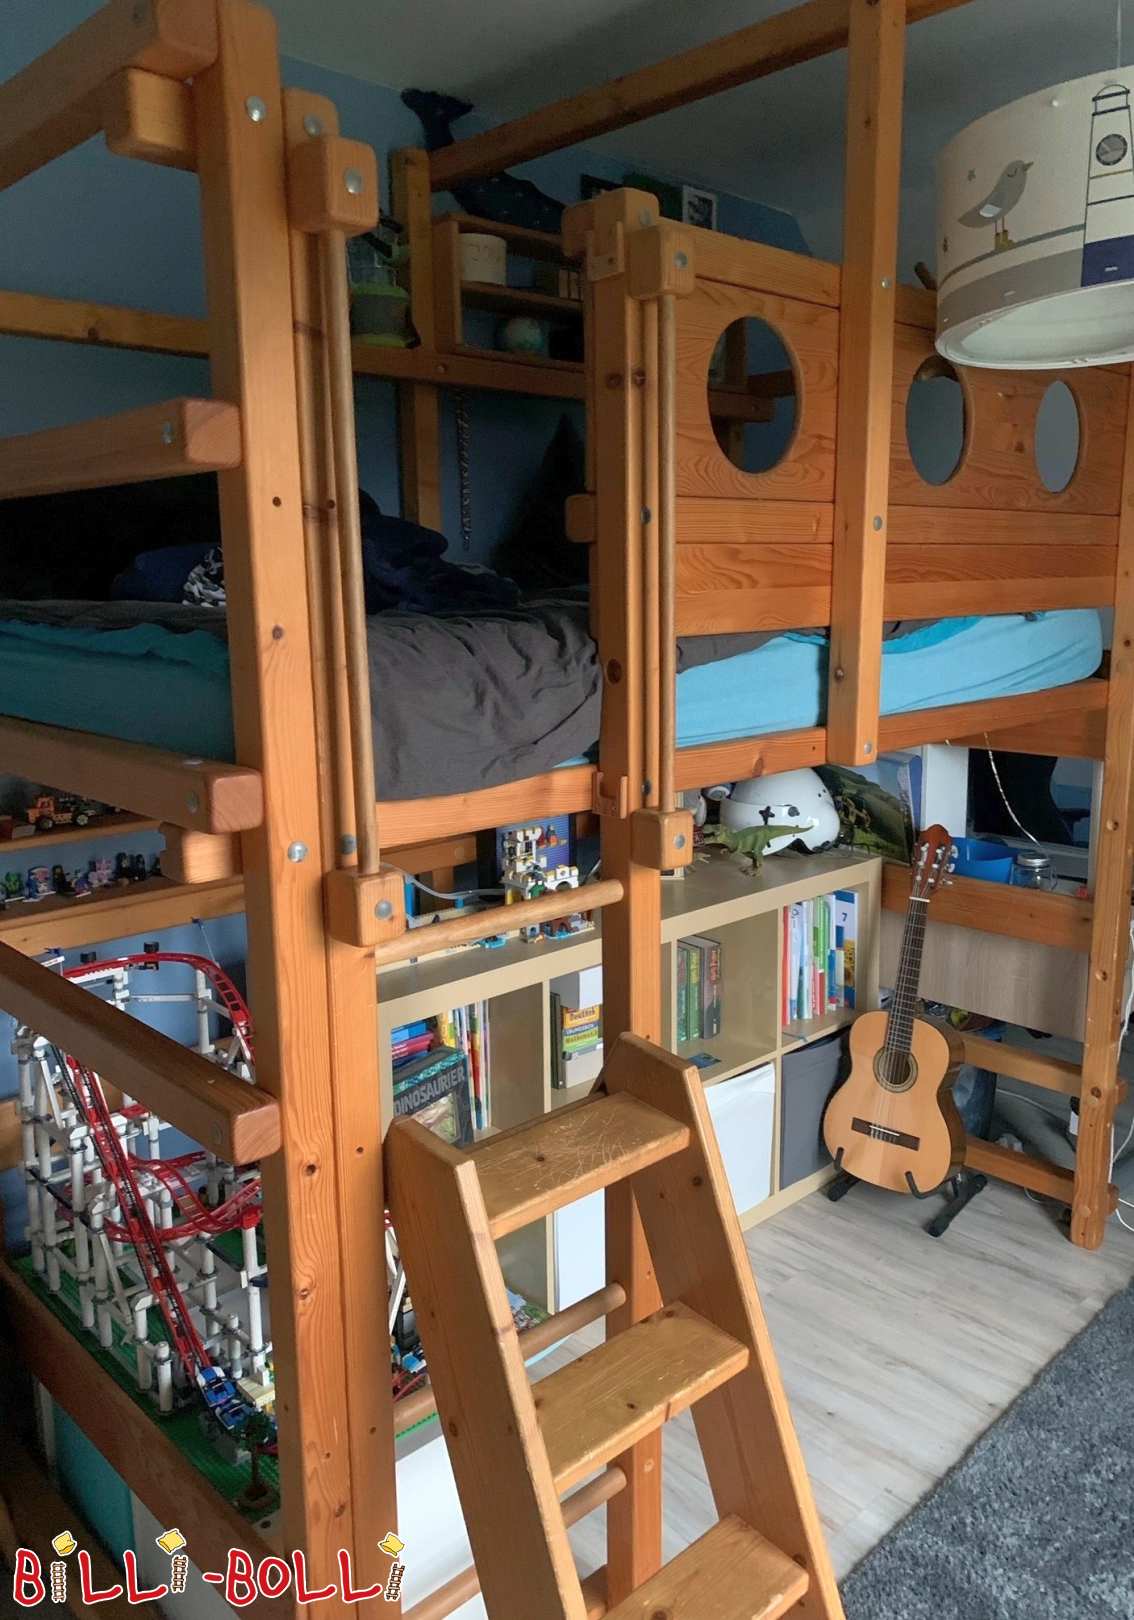 Seafarer's bunk bed growing with you – spruce (Category: second hand loft bed)